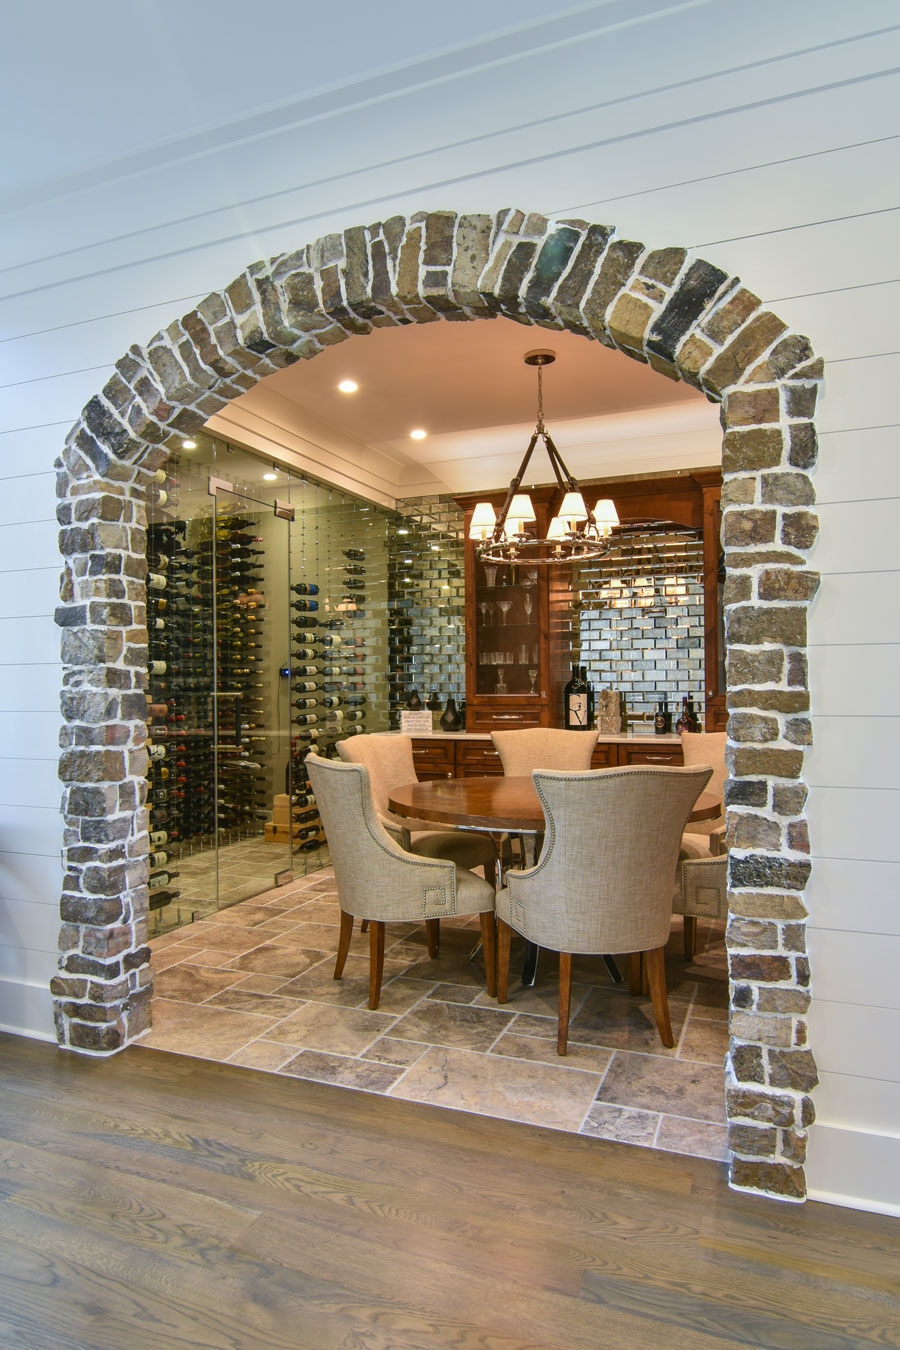 Stone arched doorway into wine tasting room